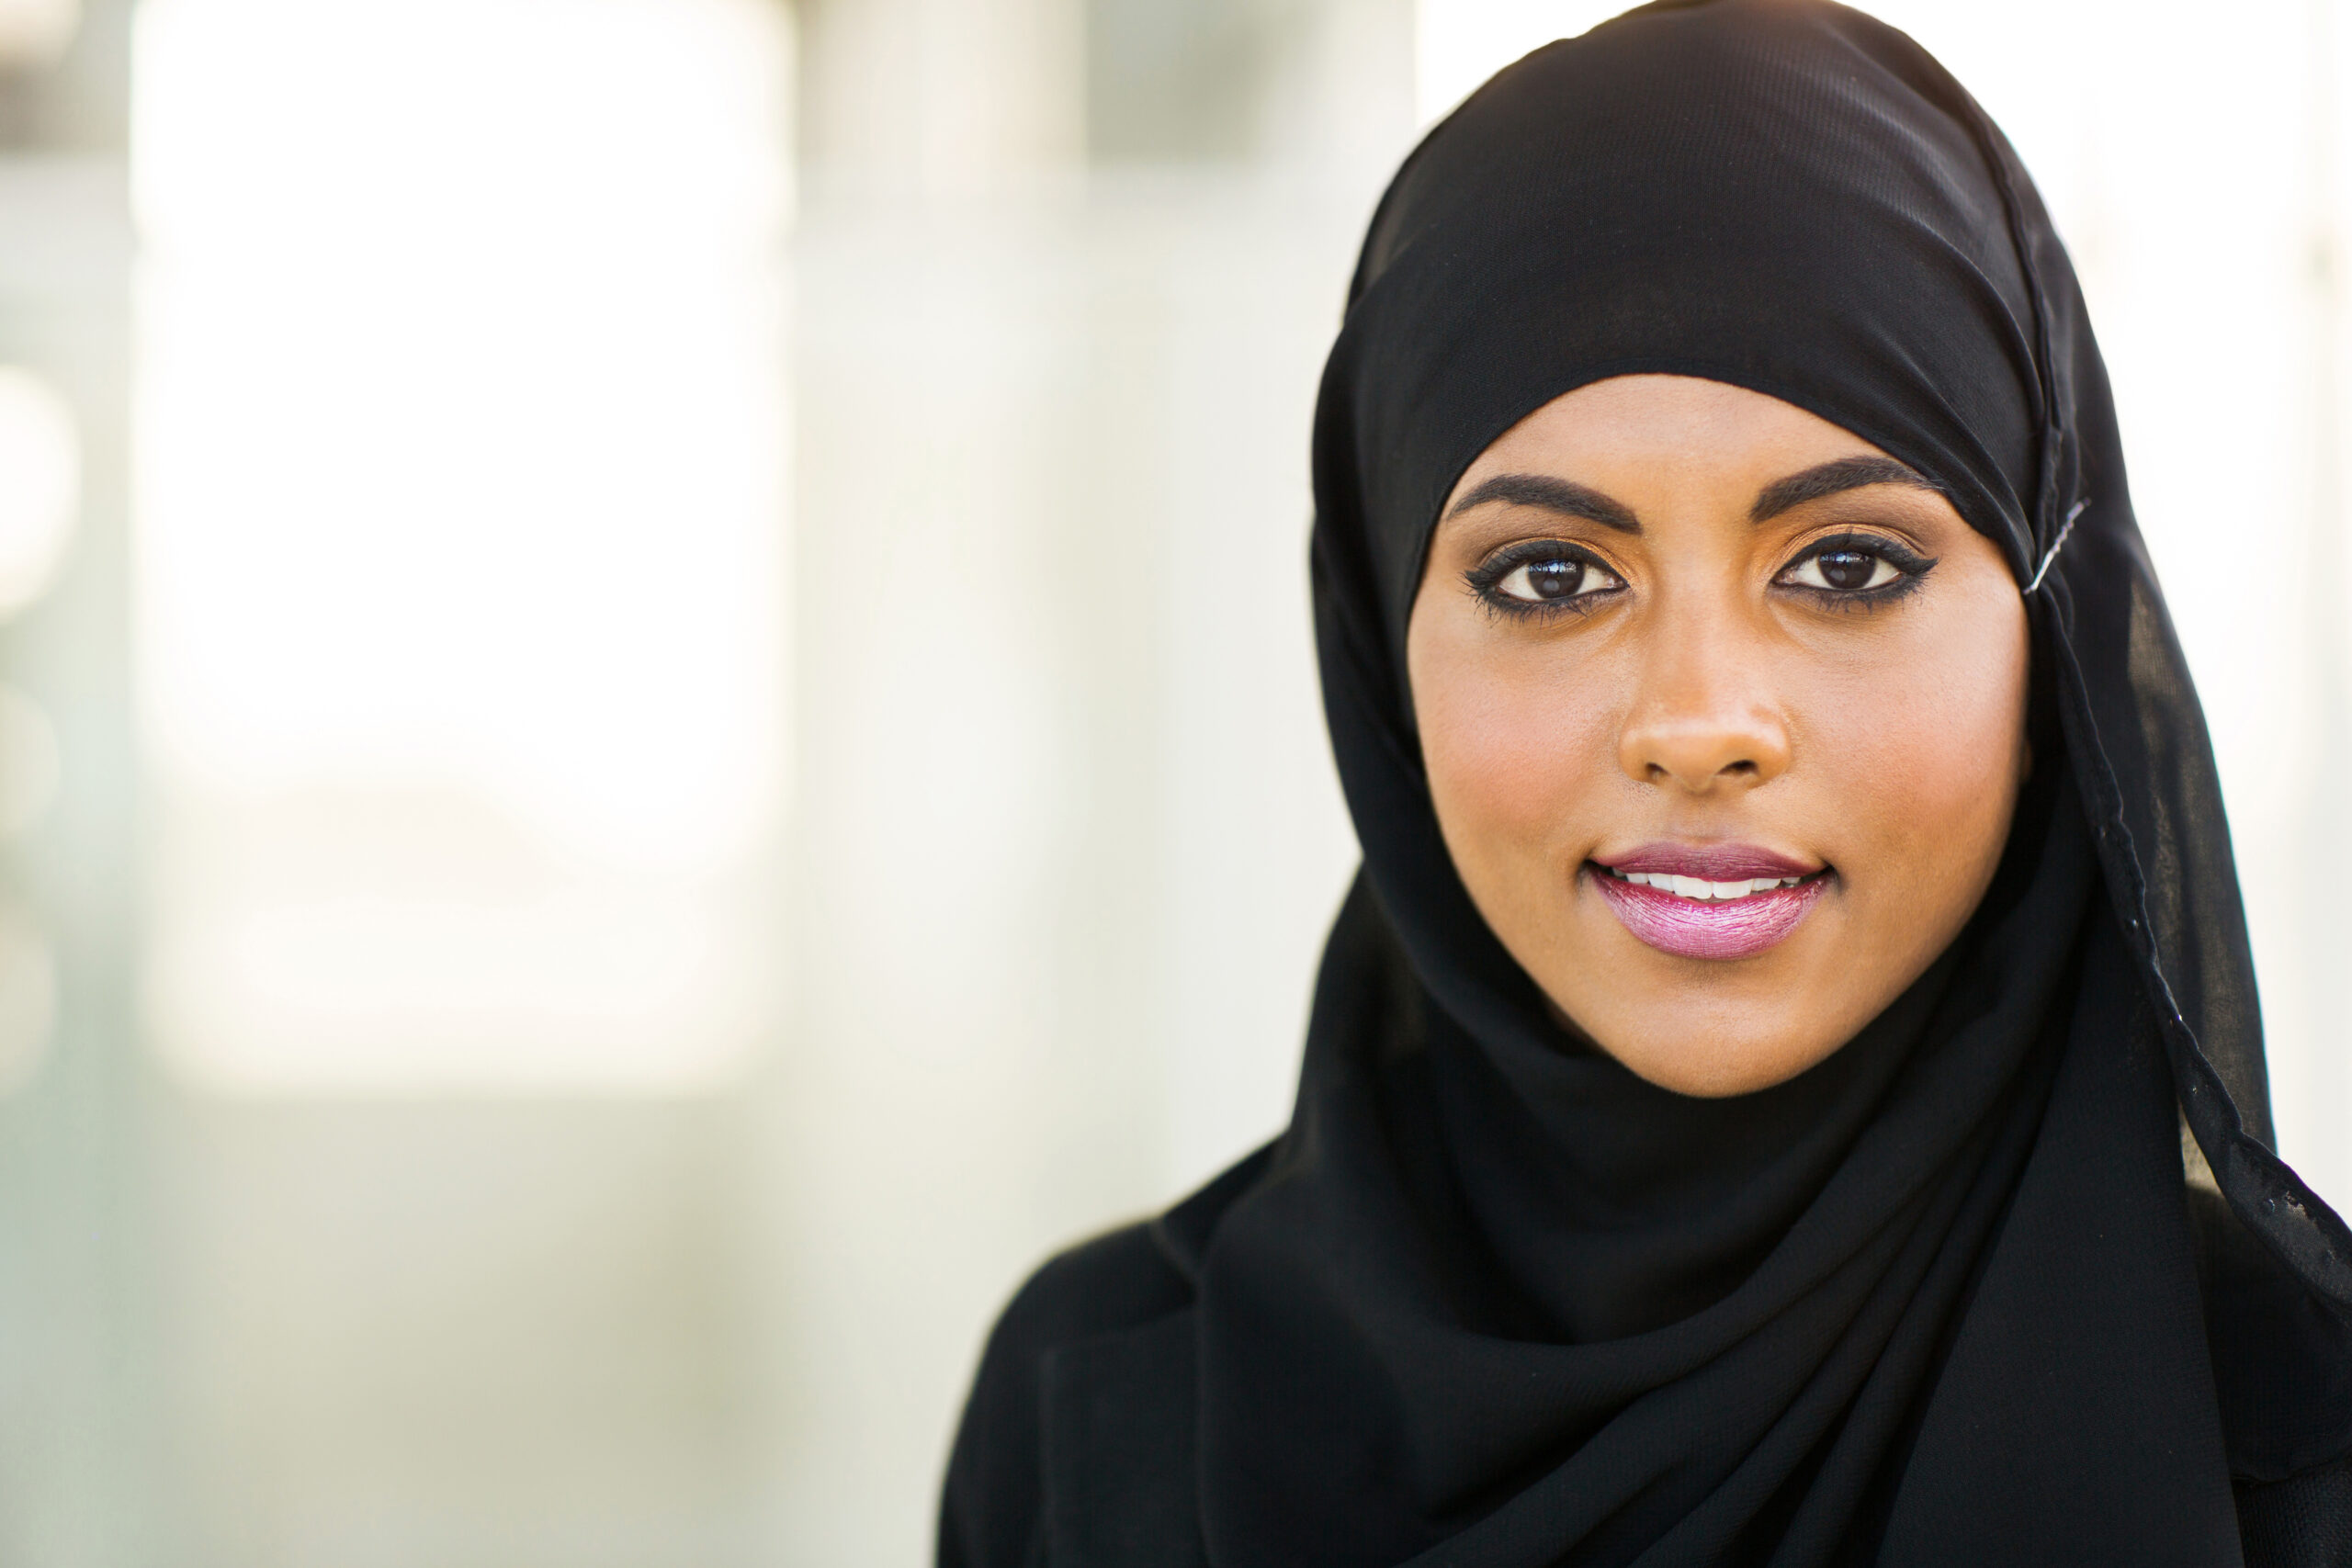 Europes Top Court Legalises Workplace Headscarf Ban For Employers 8625